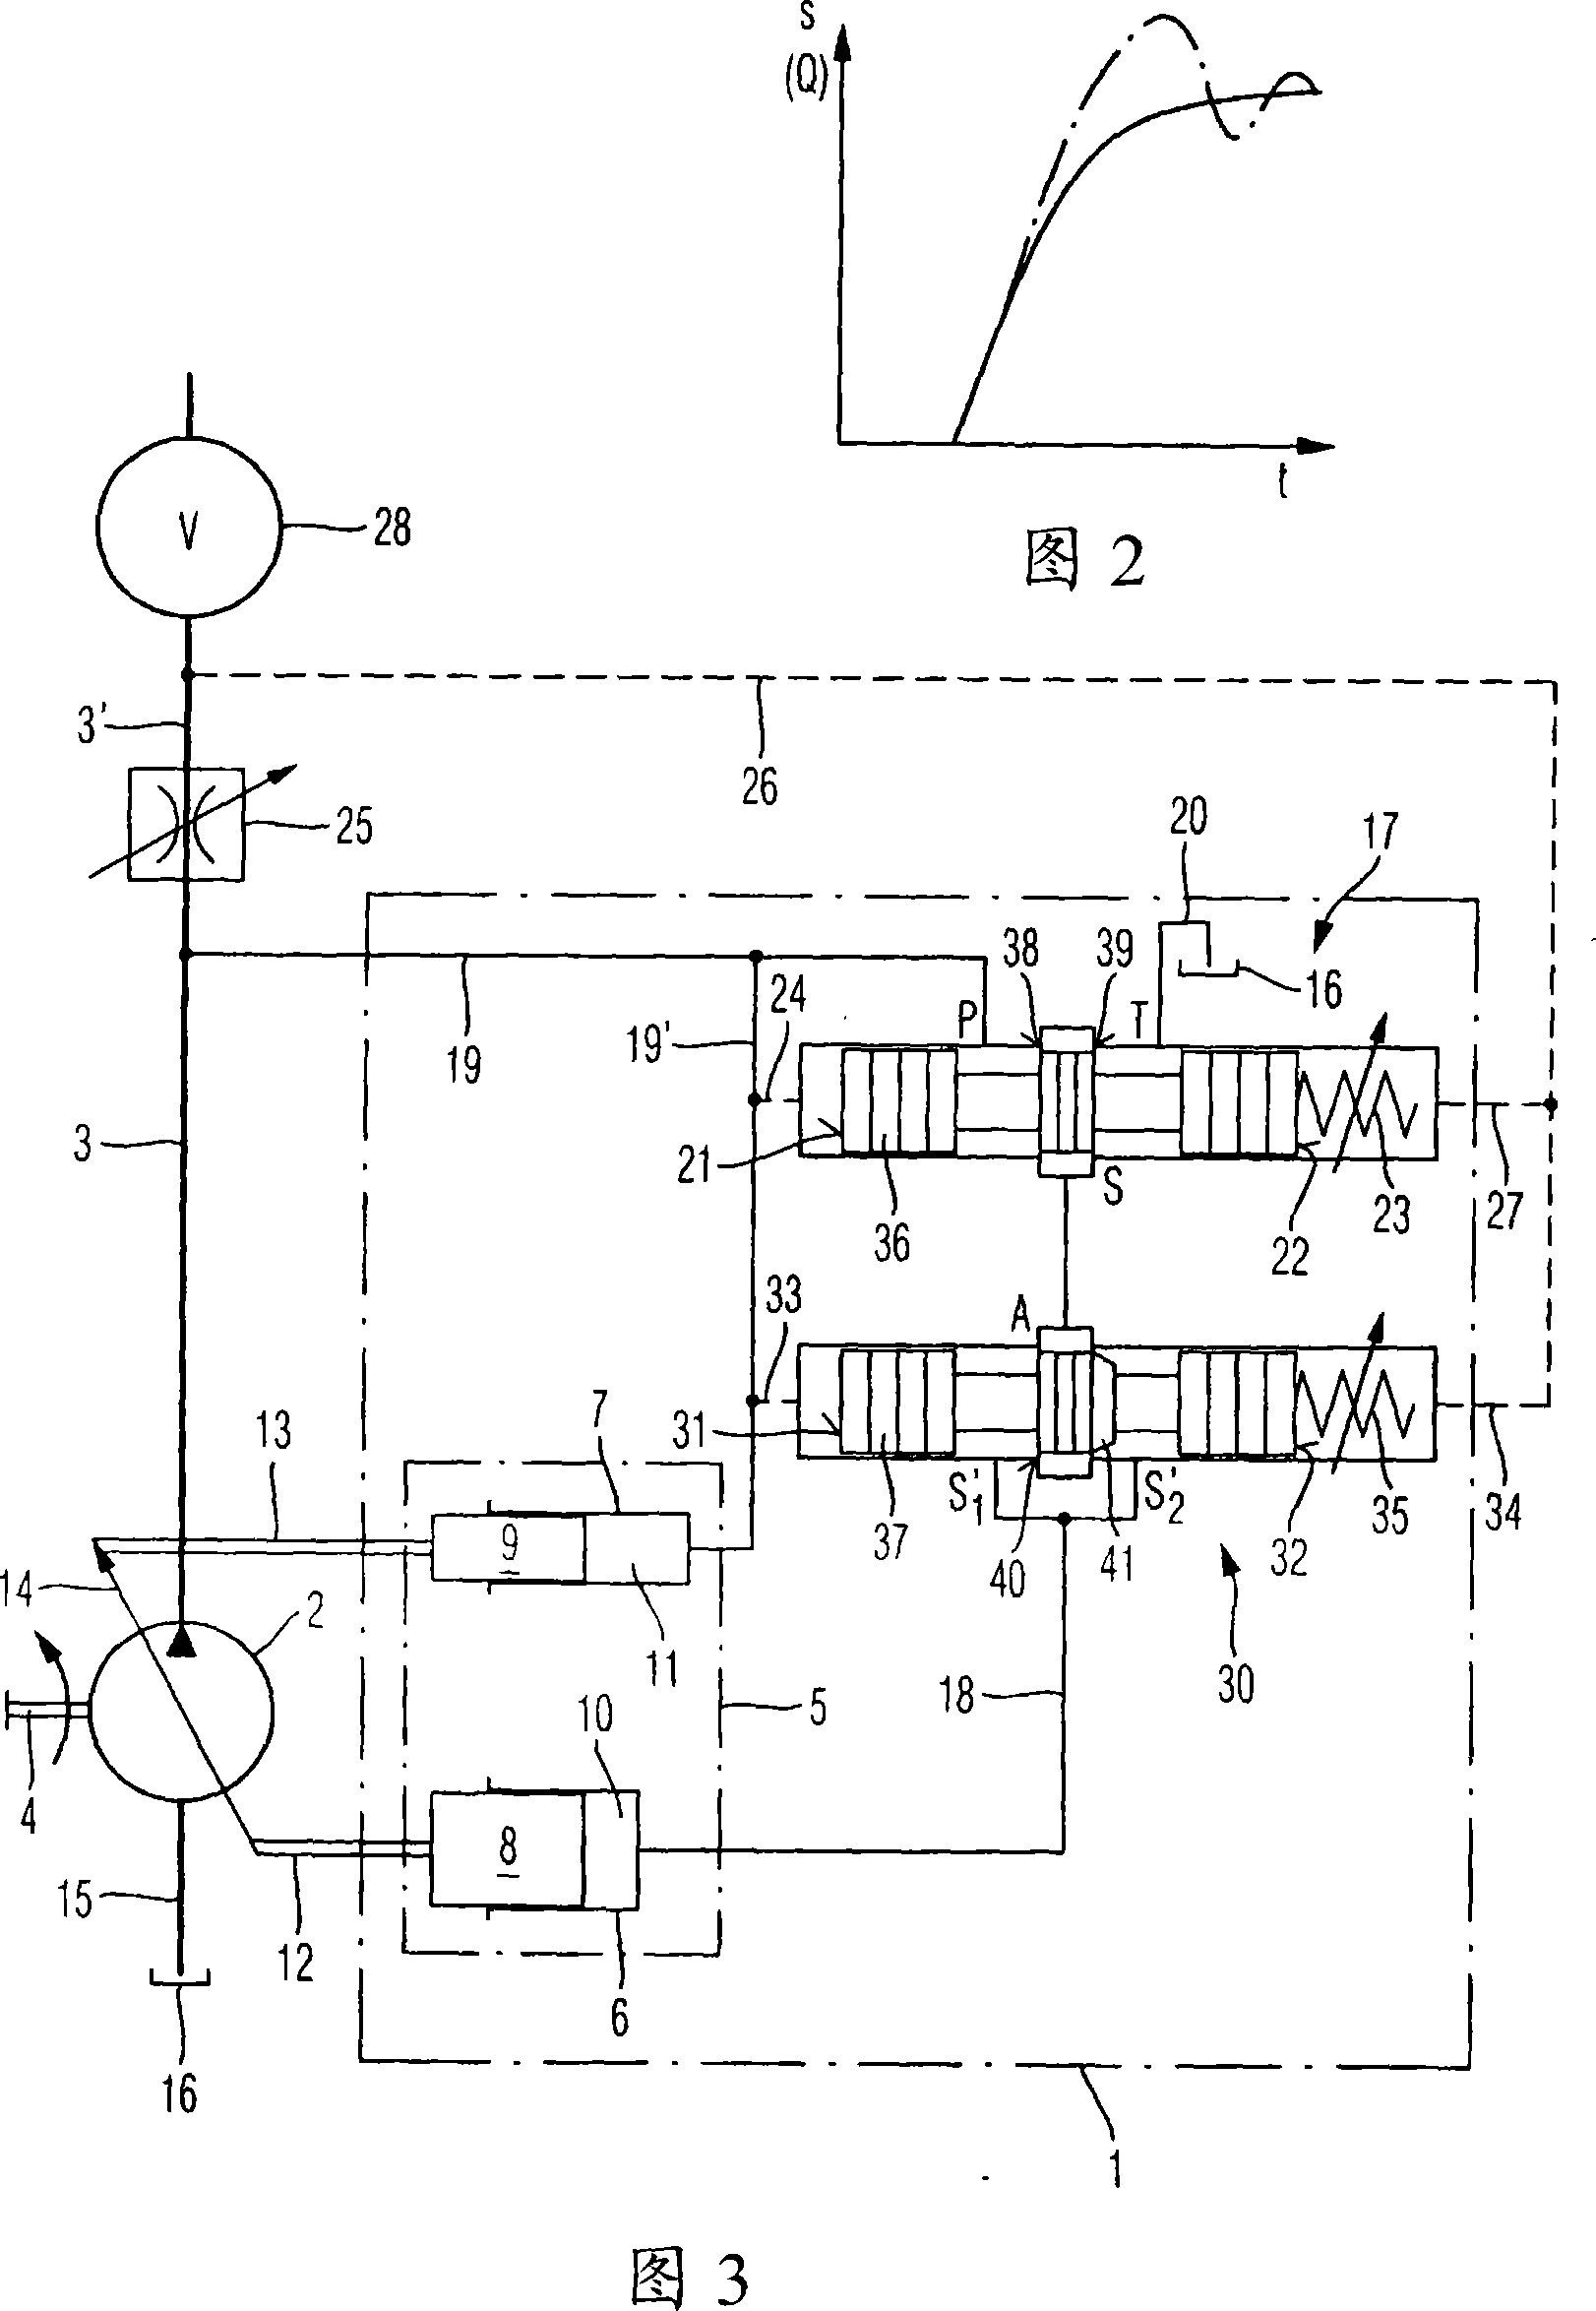 Load-pressure-controlled feed flow regulator with vibration damping